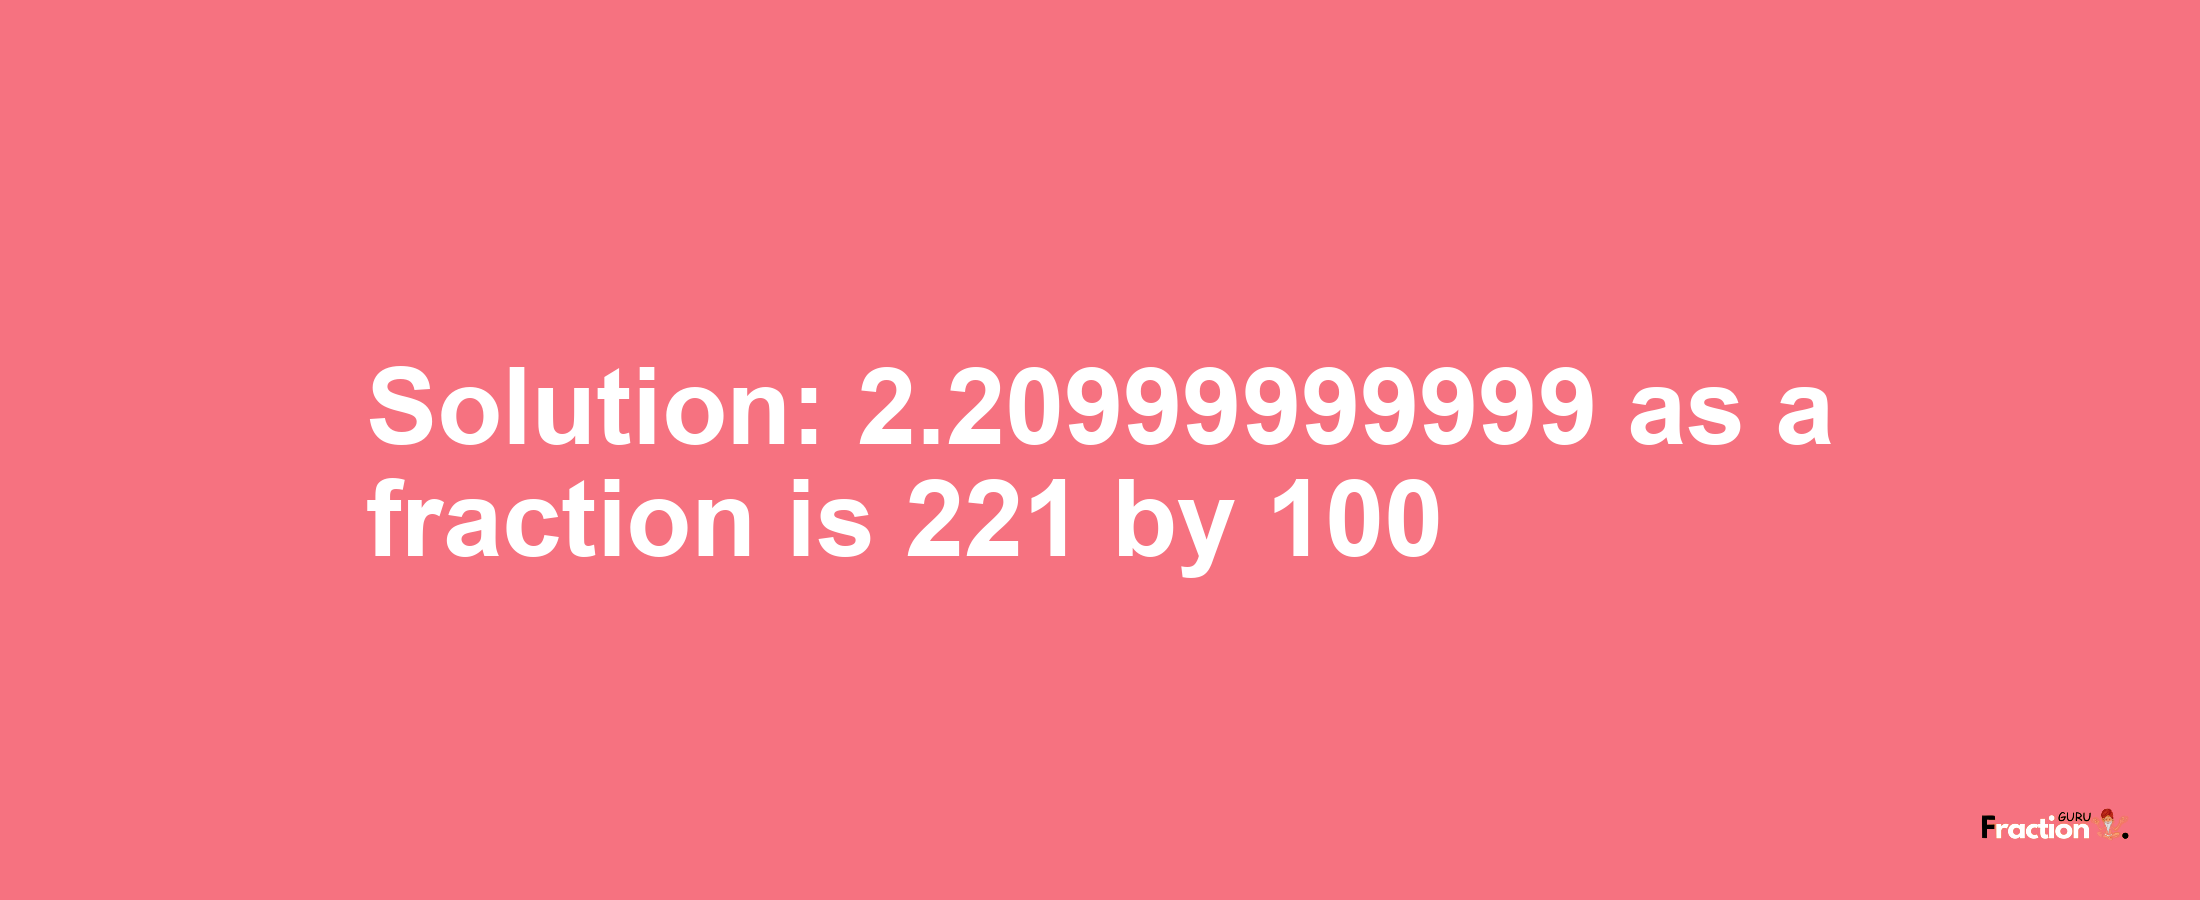 Solution:2.20999999999 as a fraction is 221/100